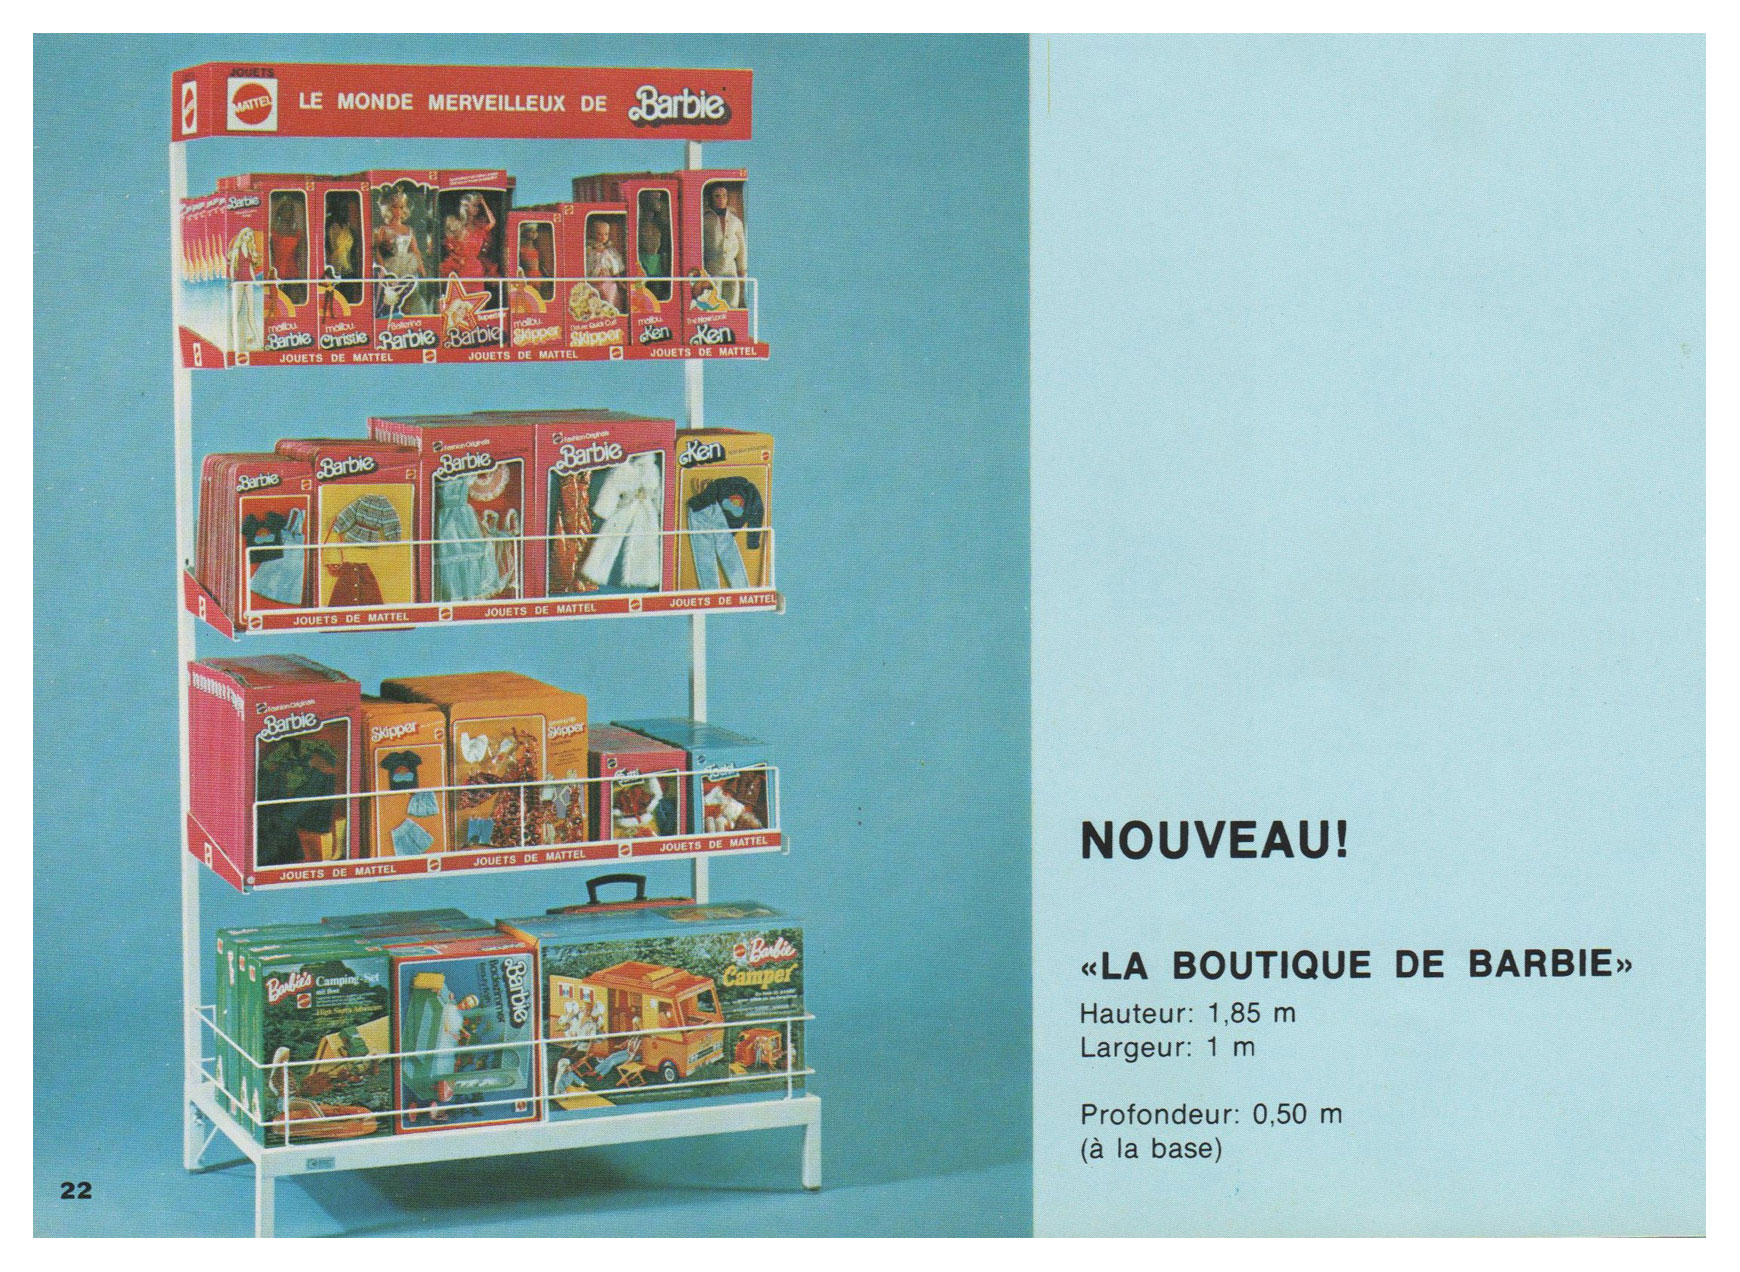 From 1977 French Mattel Toy catalogue